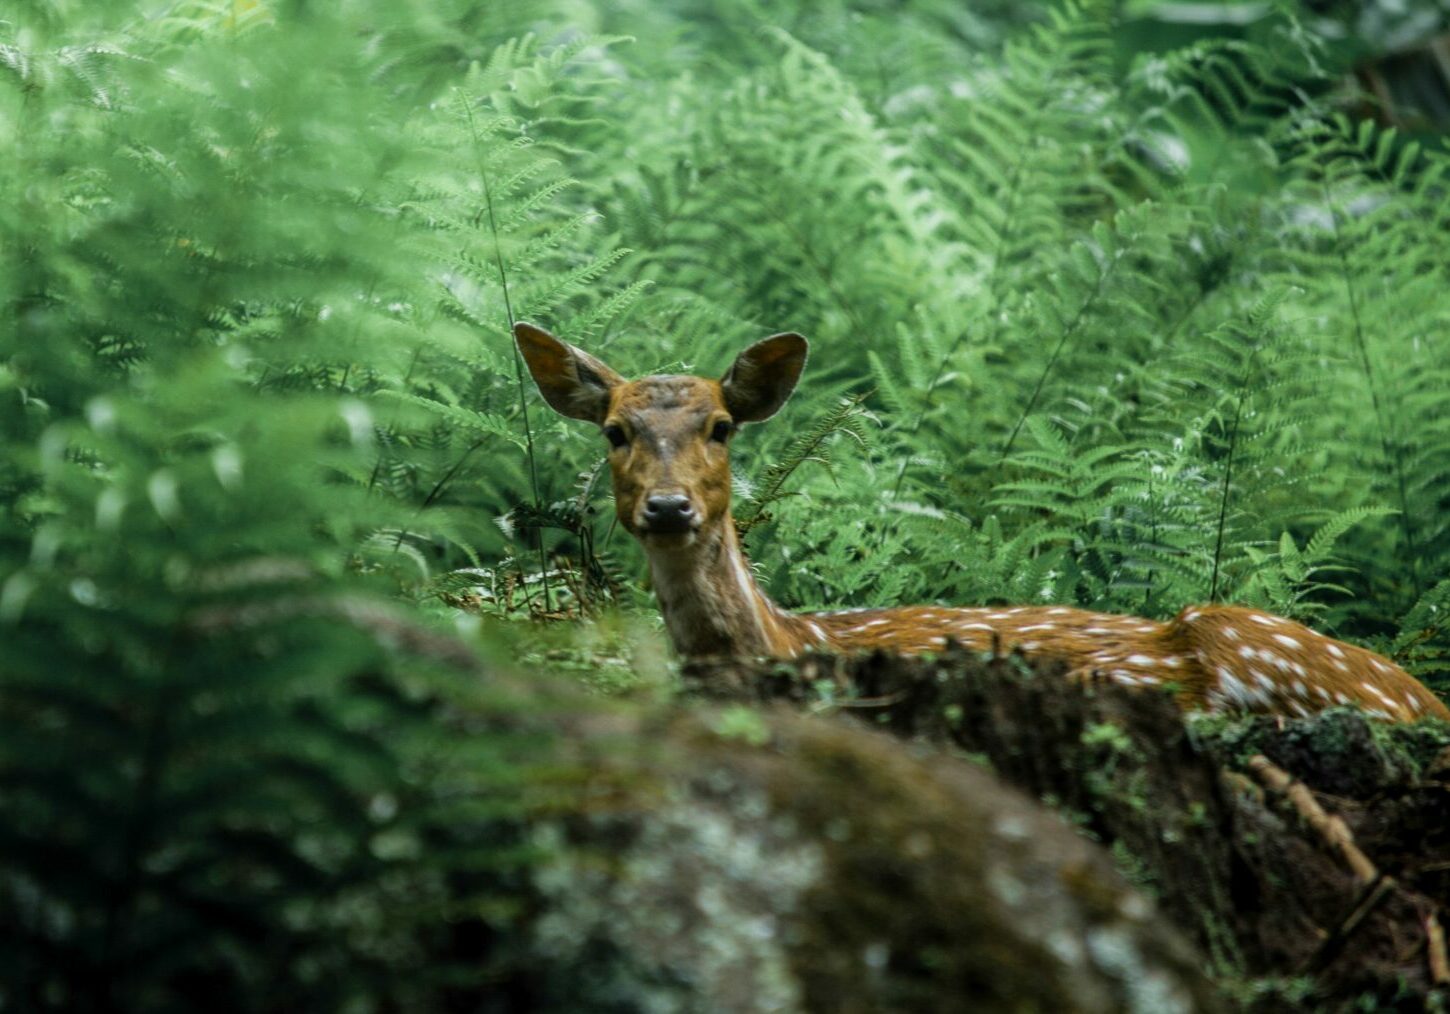 a deer among ferns looking into the camera